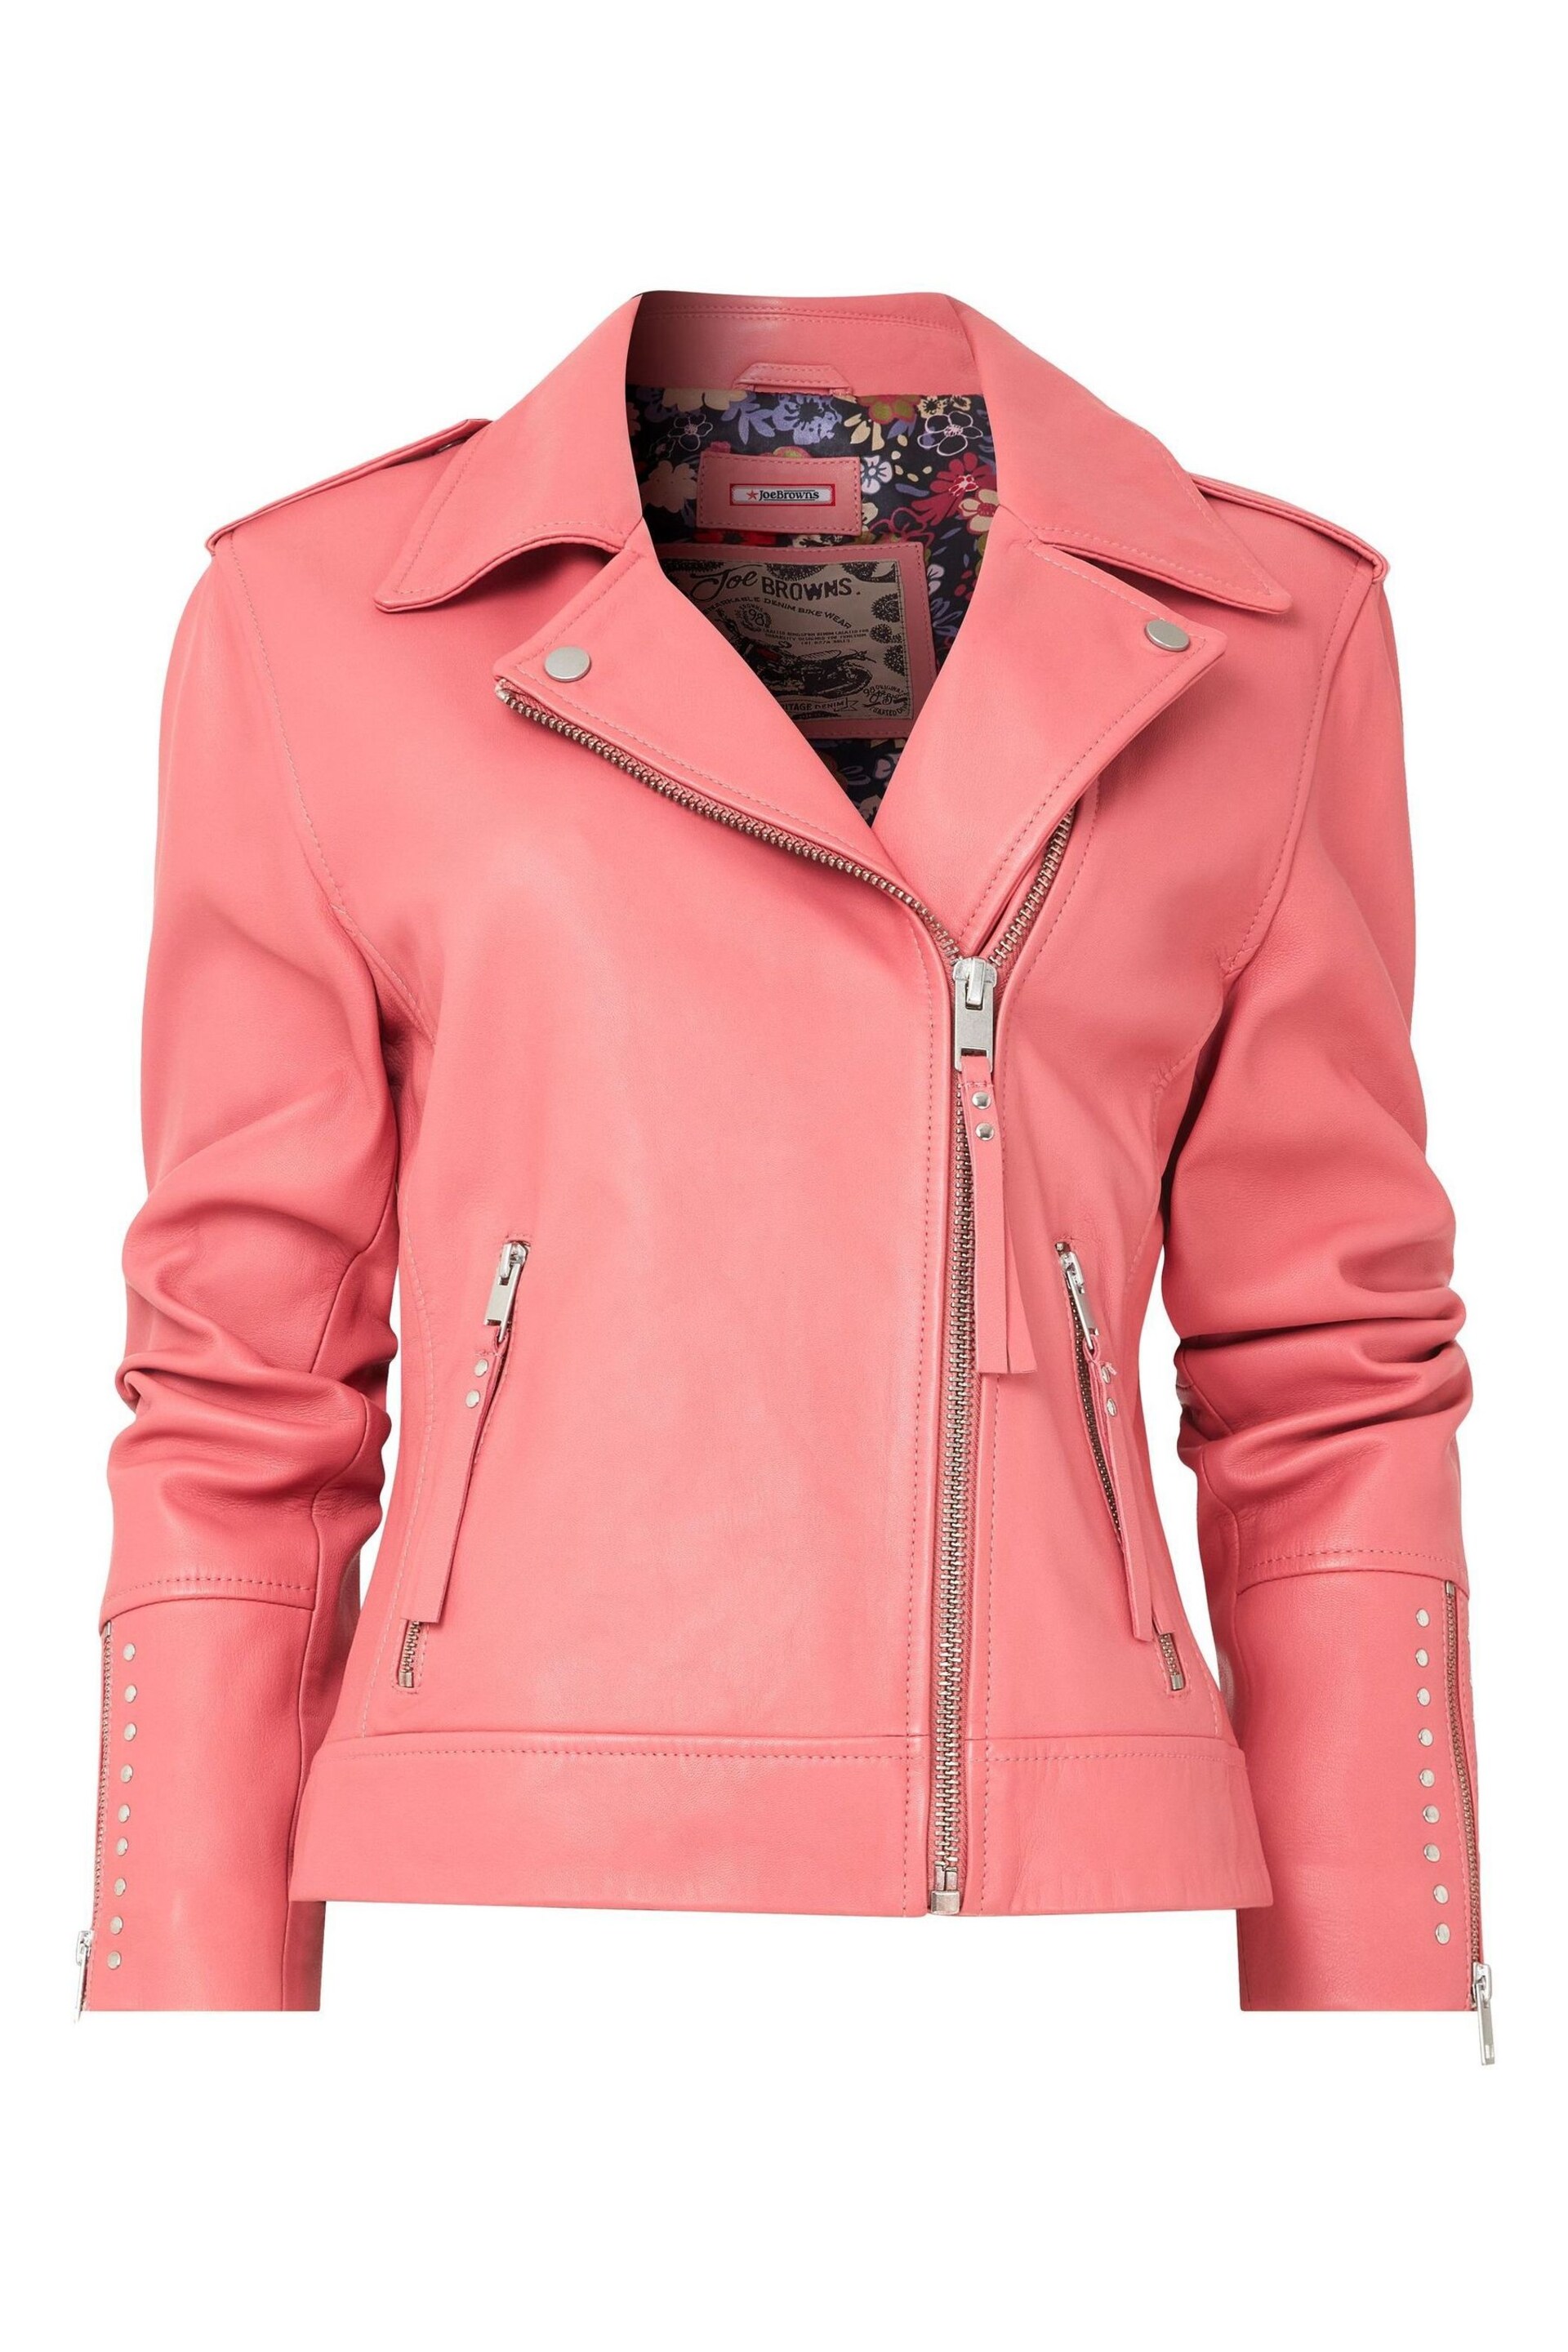 Joe Browns Pink Studded Cropped Leather Jacket - Image 5 of 5